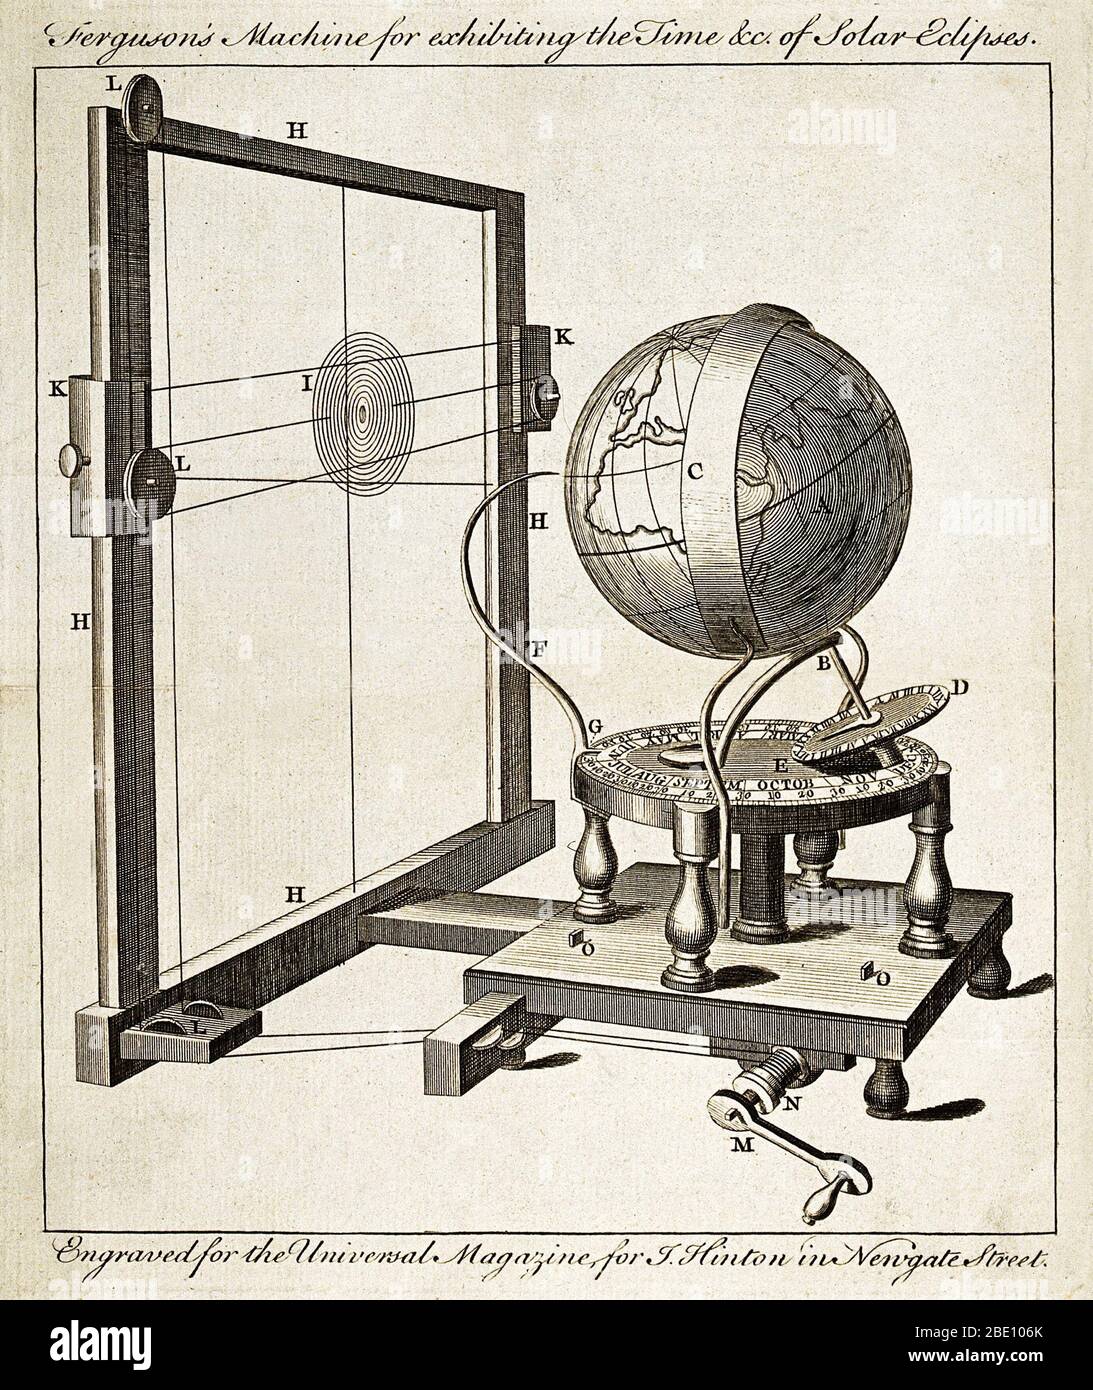 Solar eclipse predictor, c.1750. An illustration showing a mechanism designed to exhibit the time, duration and location of solar eclipses seen from the Earth. This mechanism was designed by the Scottish astronomer James Ferguson (1710-1776). Ferguson was elected a Fellow of the Royal Society in 1763. Stock Photo